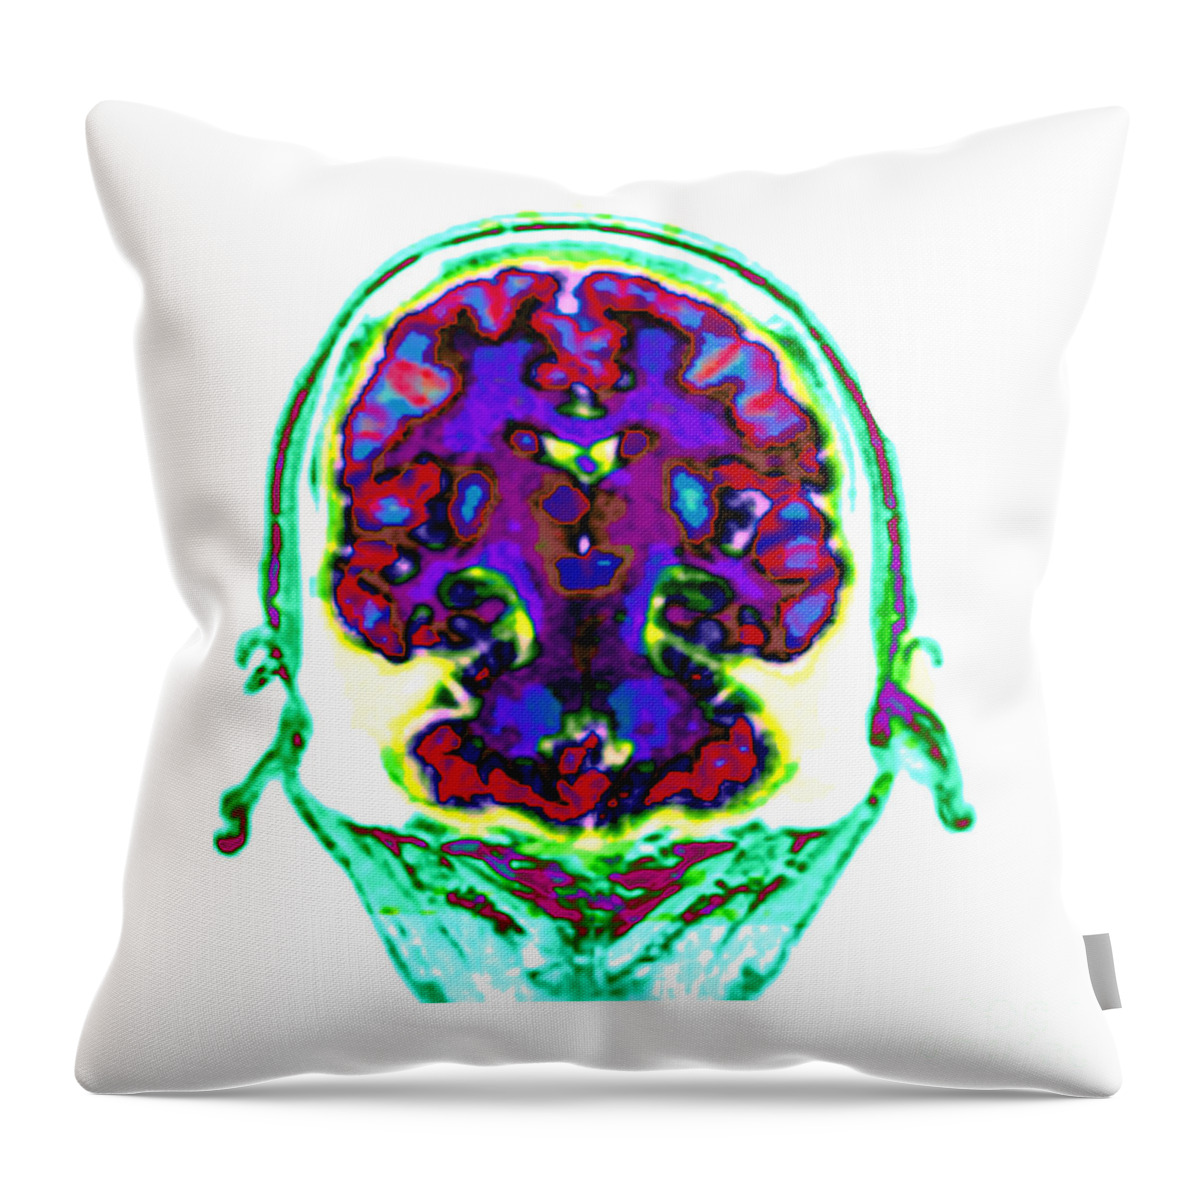 Spect Throw Pillow featuring the photograph Spect Exam Of Human Brain by Living Art Enterprises